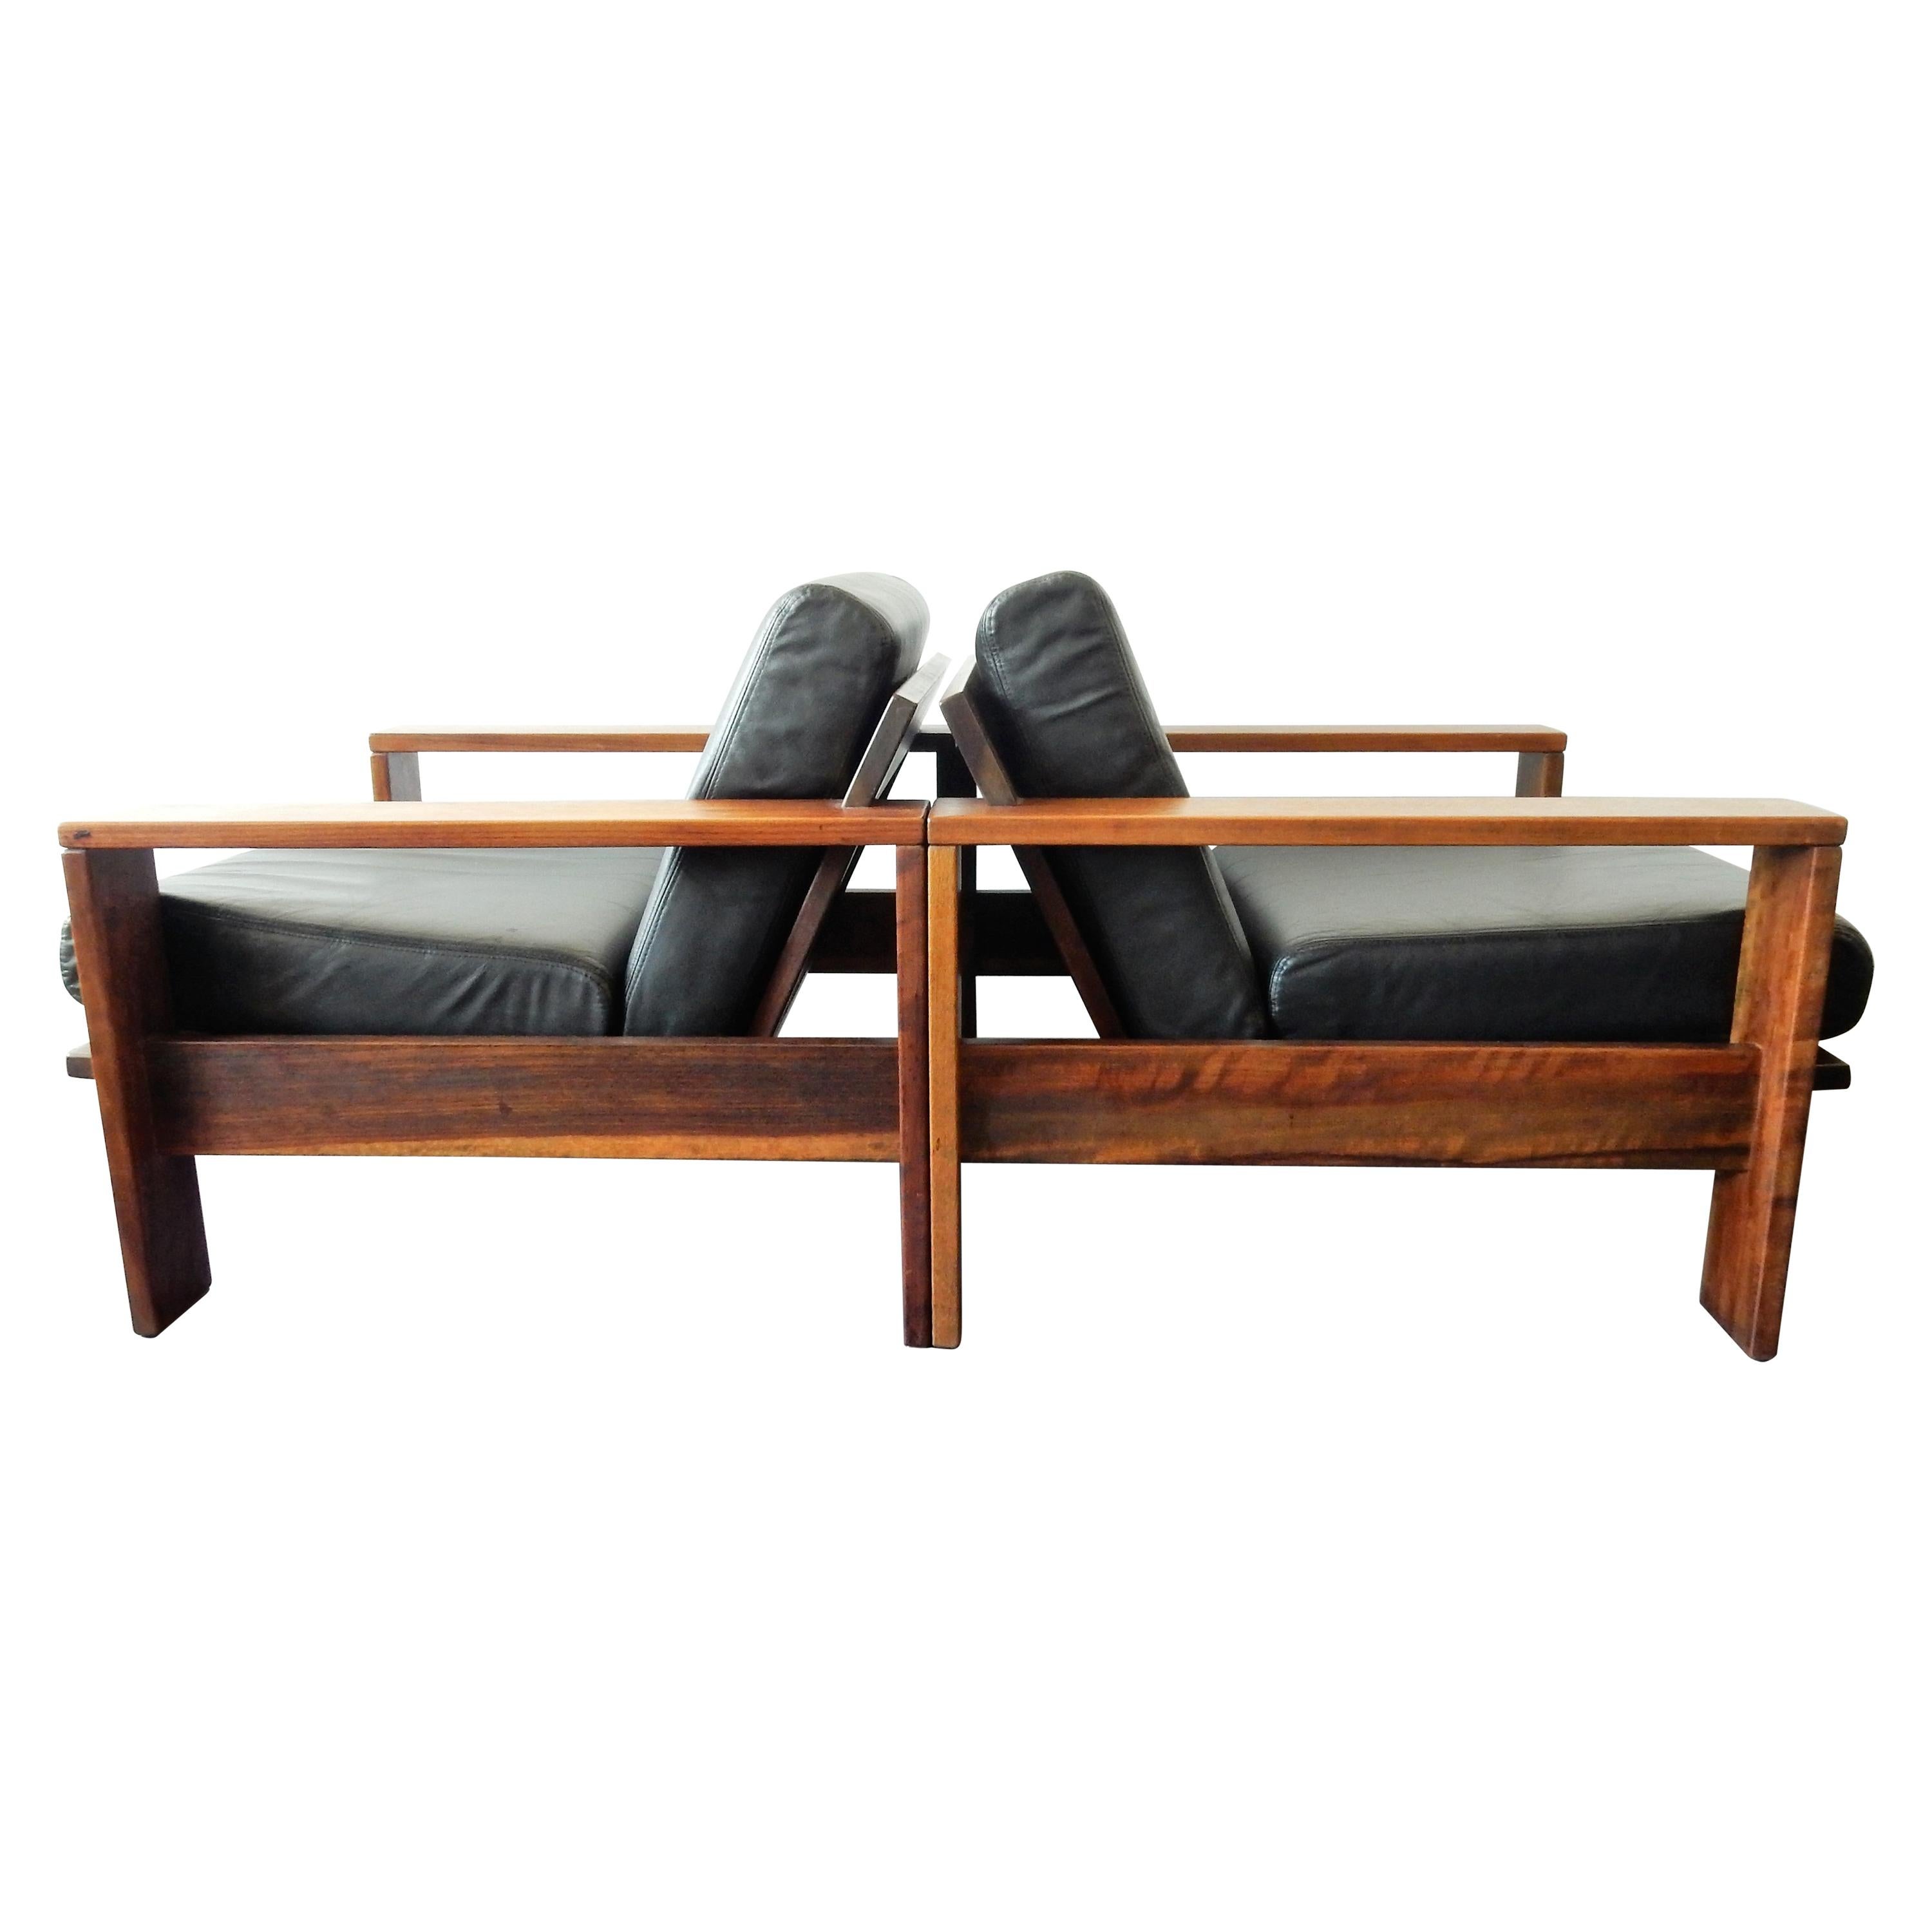 Set of 2 Solid and Comfortable Lounge Chairs, Netherlands, 1970s